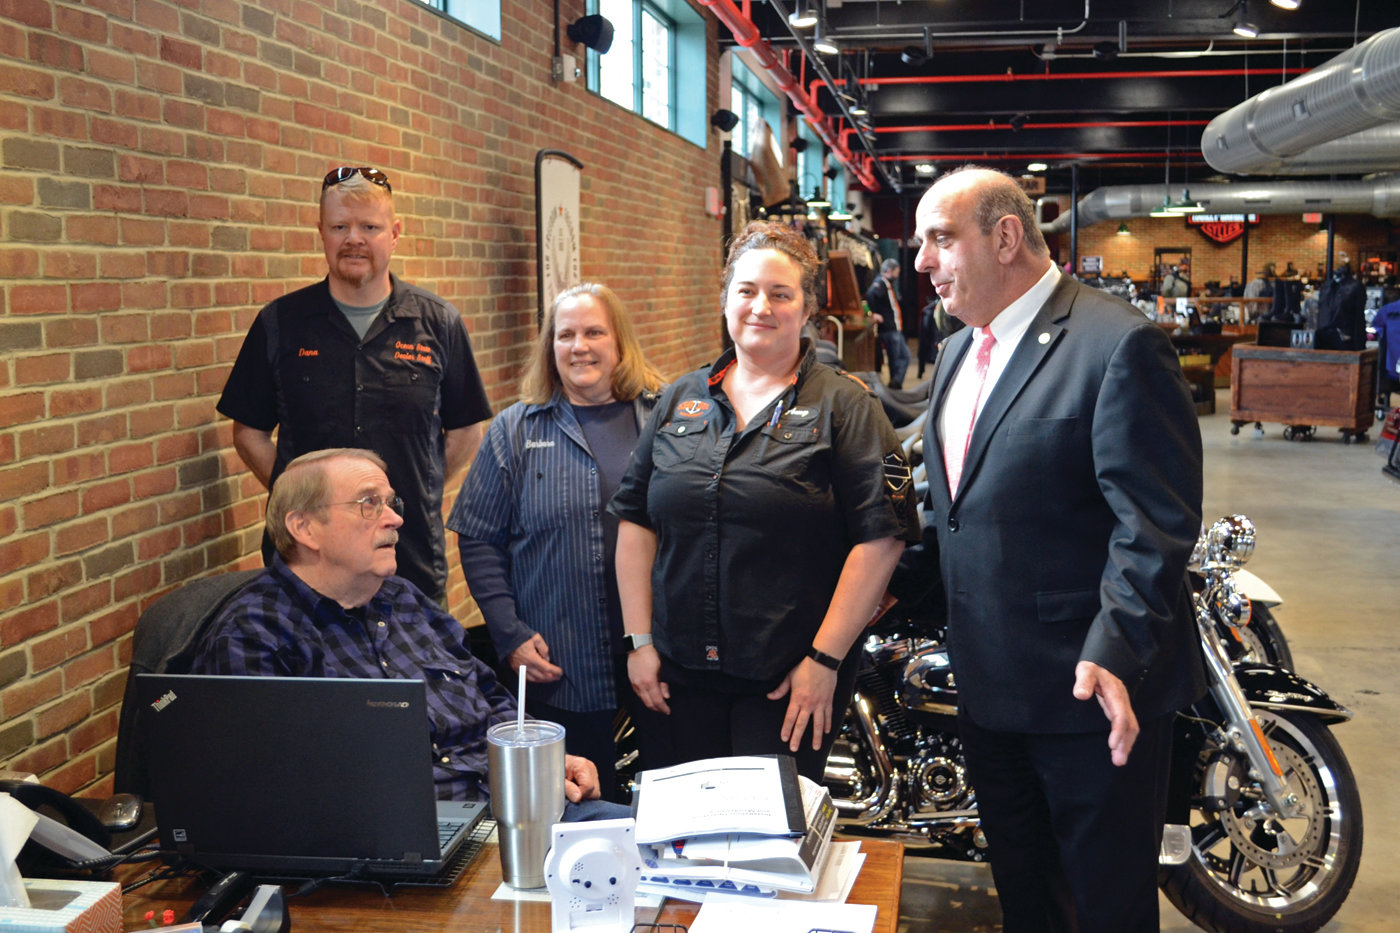 FAMILY BUSINESS: First generation owners Russ and Barbara Hamptom pose with their second generation, daughter Amy Bishop (owner) and her husband Dana, along with Mayor Solomon during his visit to Russ’ Ocean State Harley-Davidson on Tuesday.